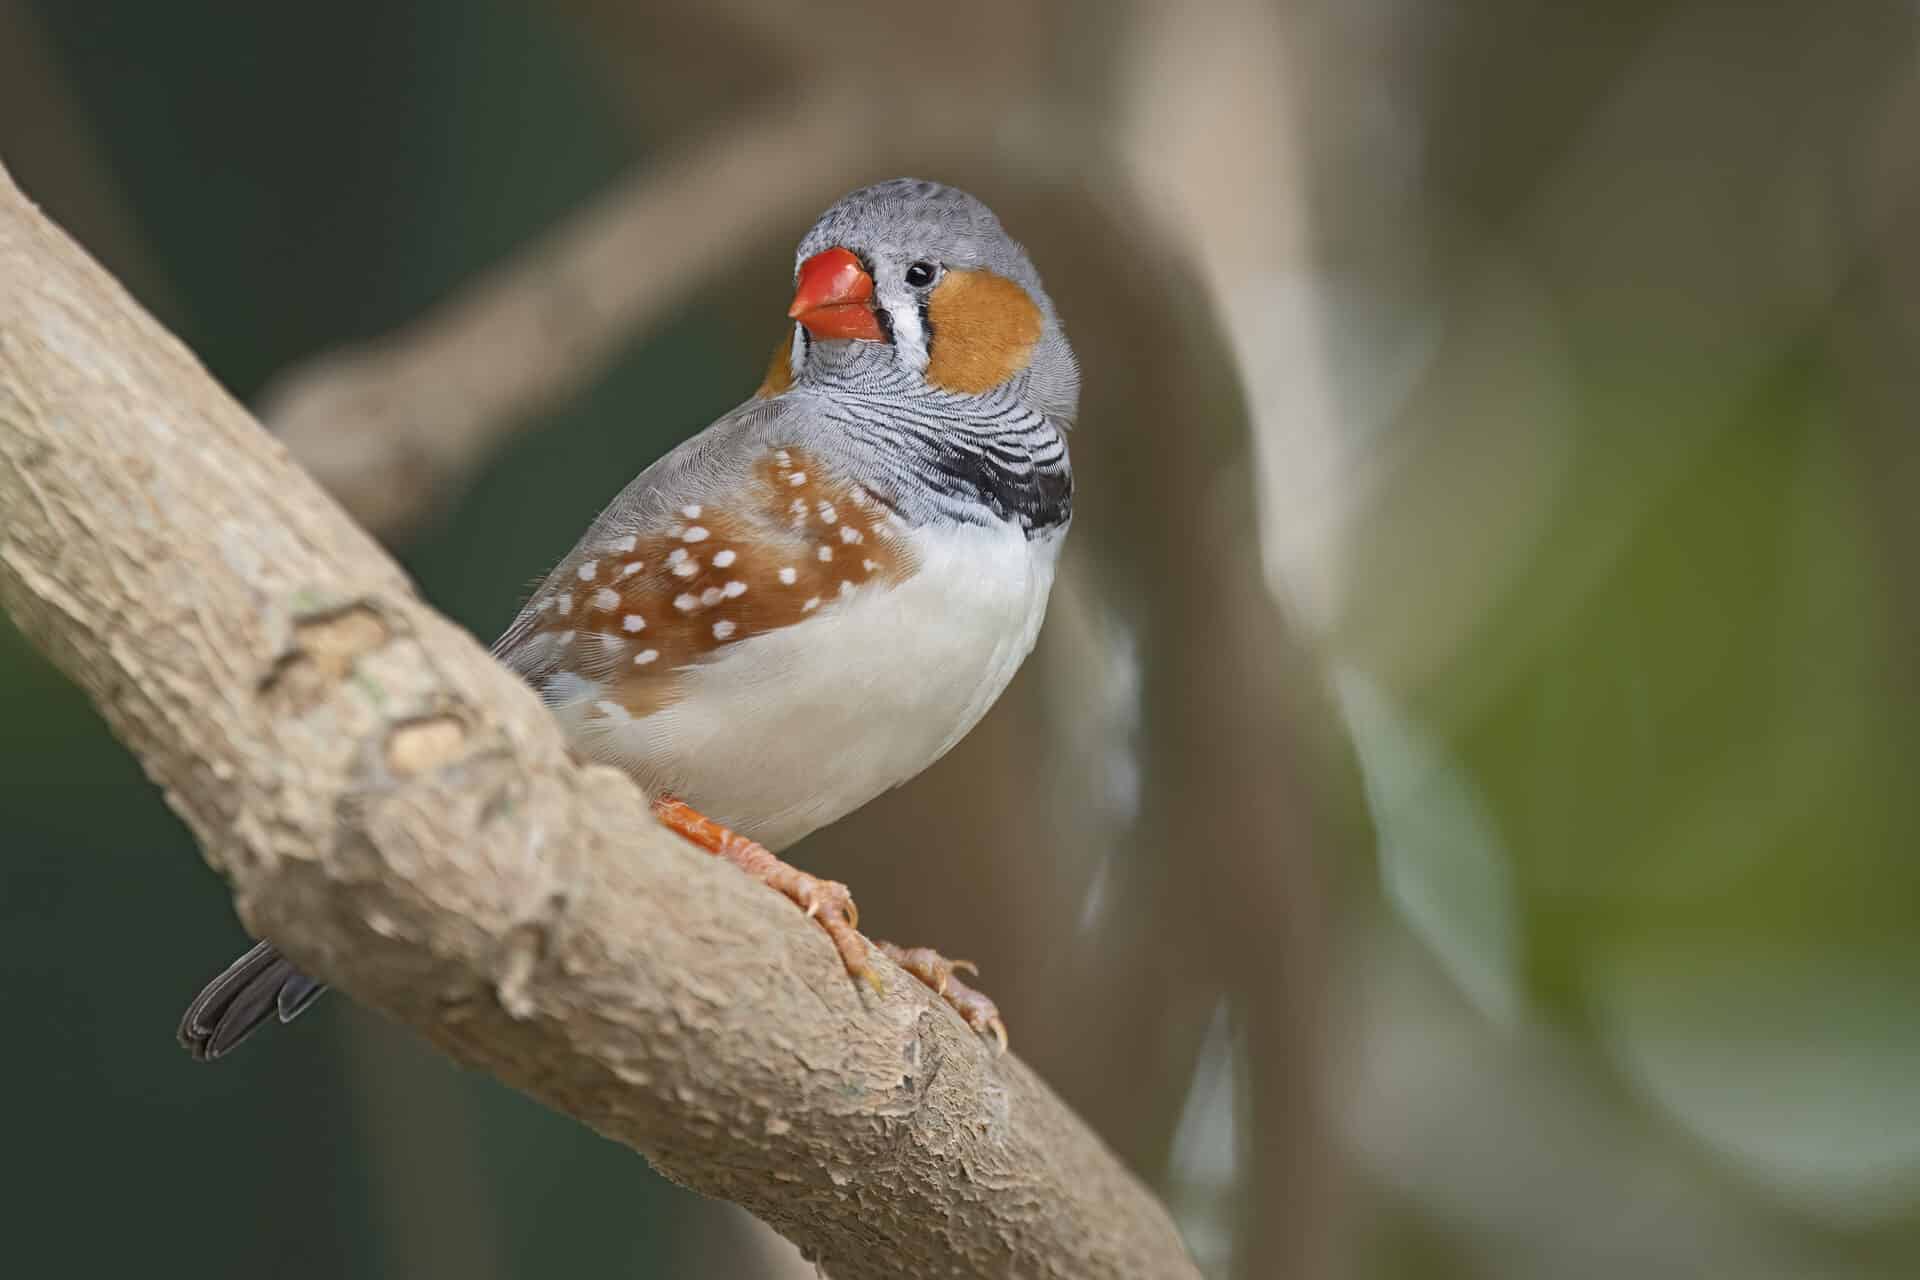 Zebra Finch at the Victoria Butterfly Gardens